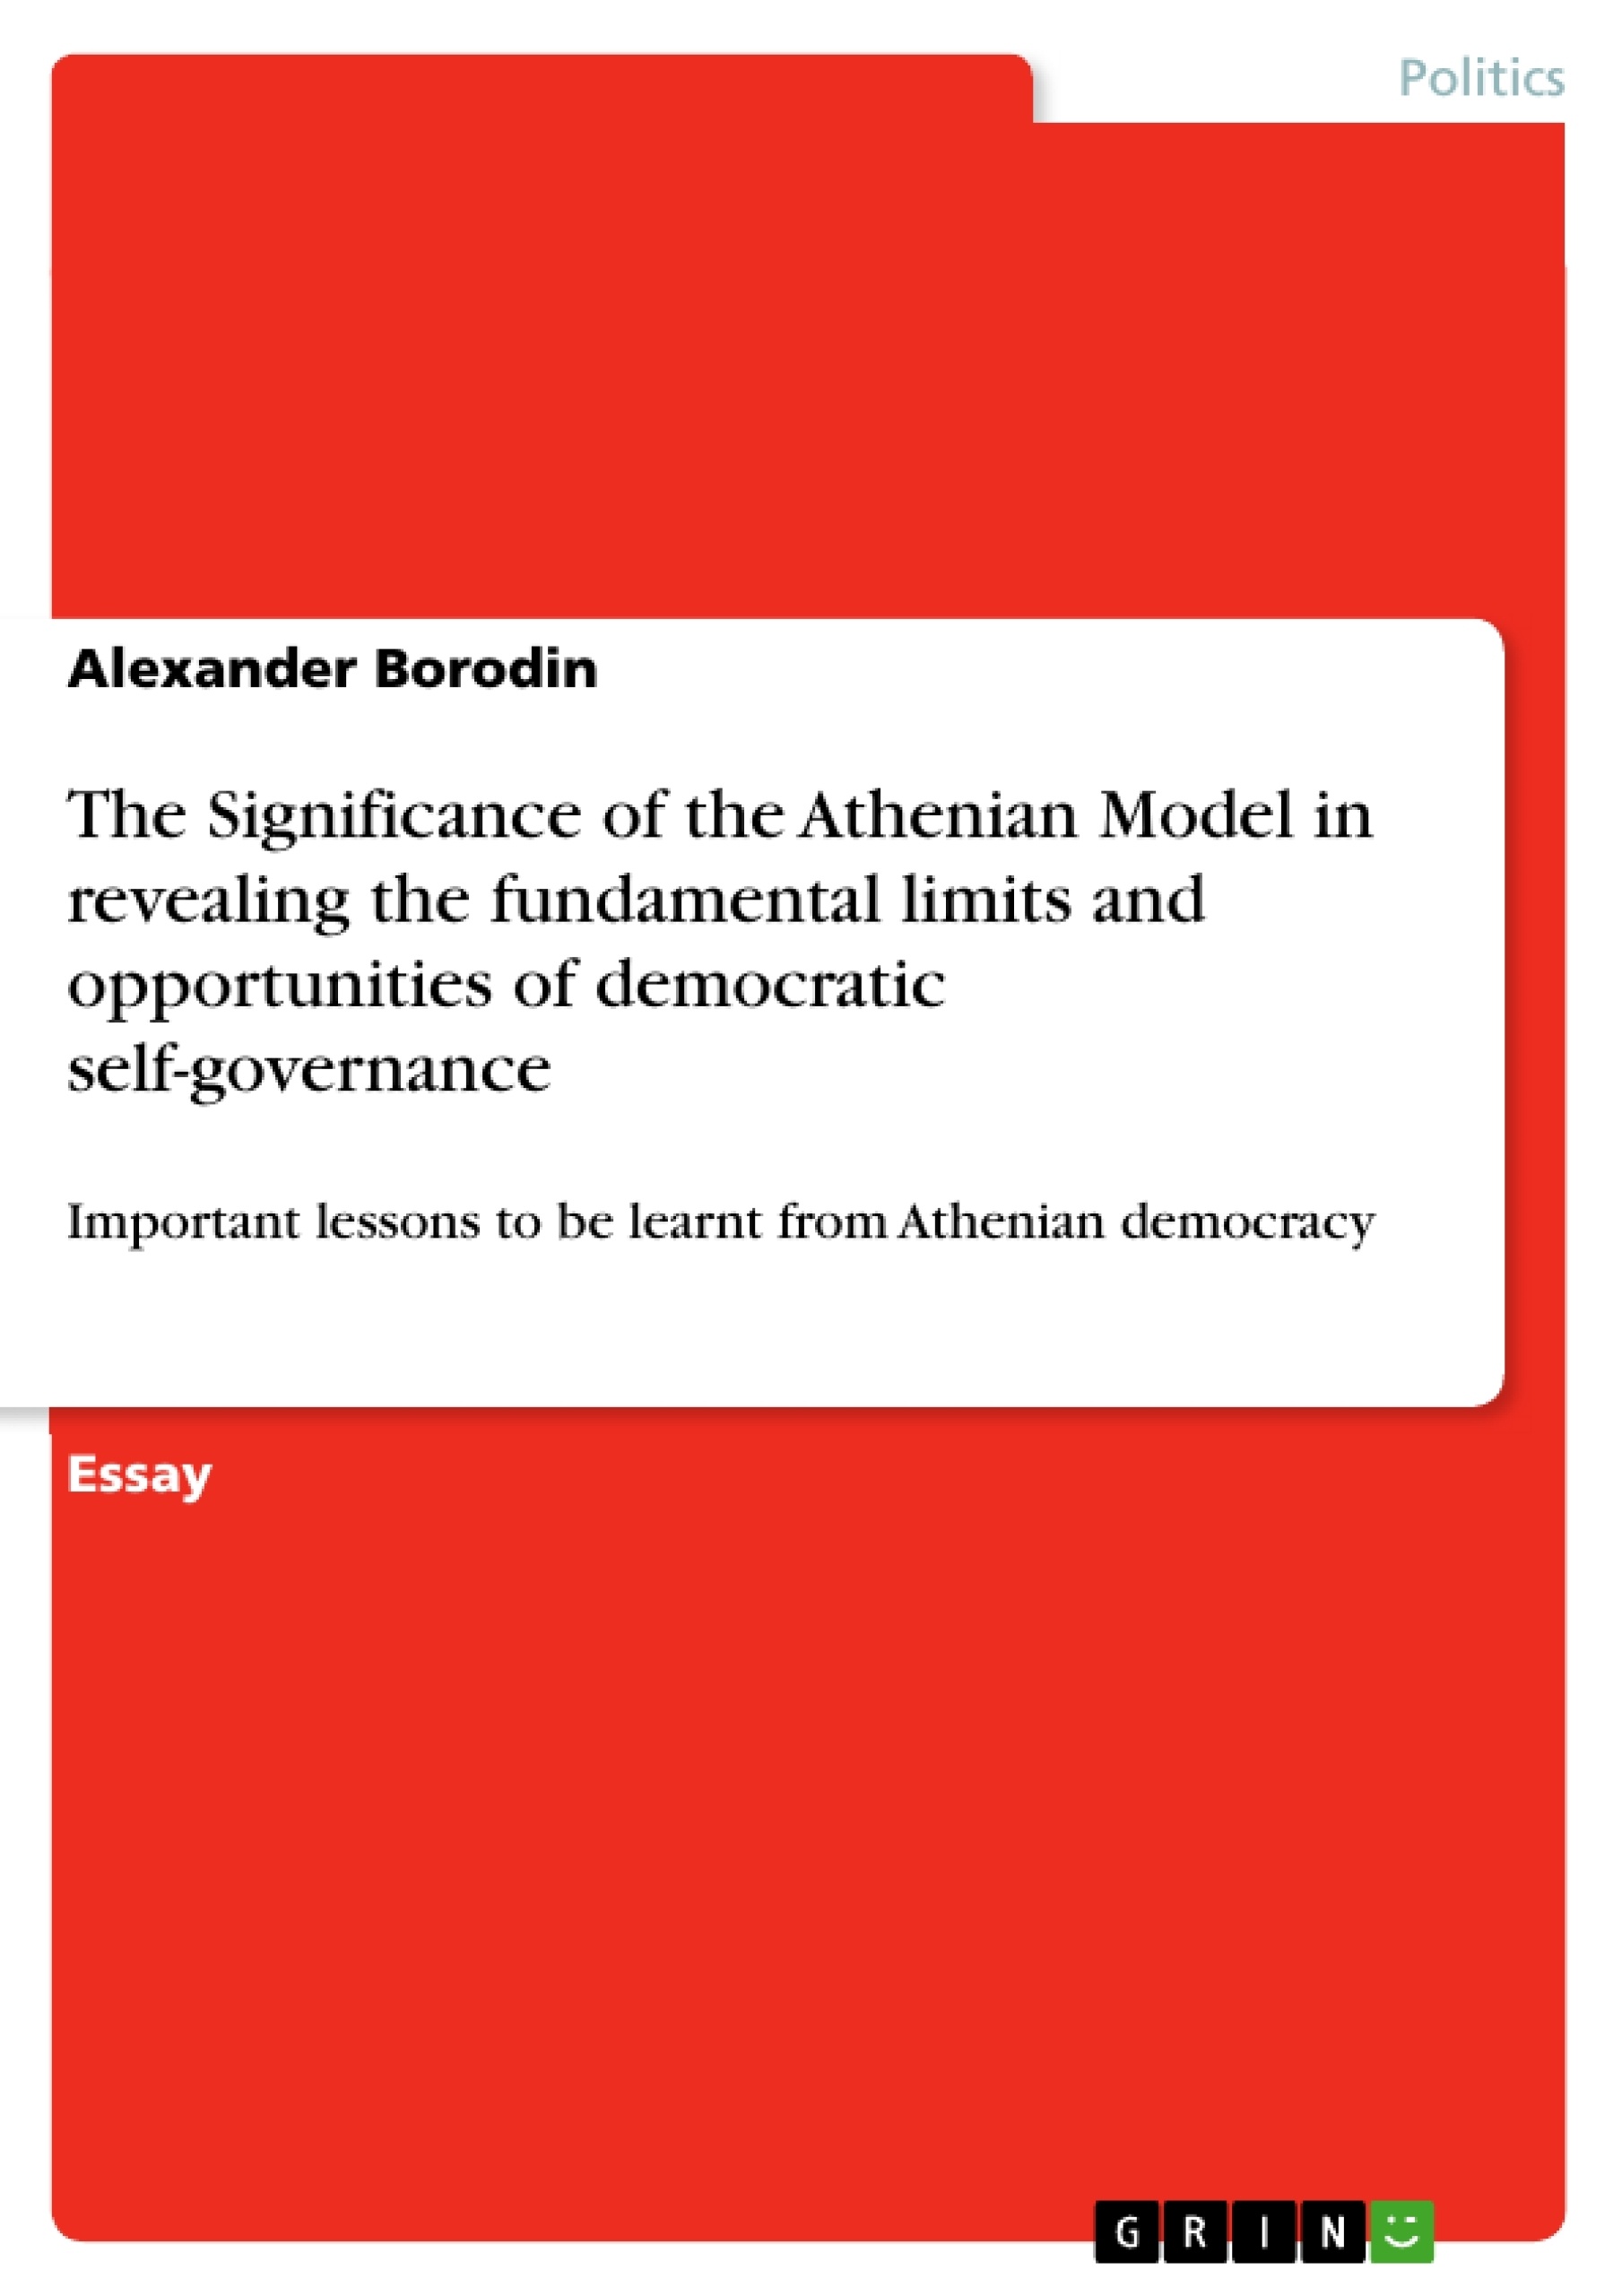 Título: The Significance of the Athenian Model in revealing the fundamental limits and opportunities of democratic self-governance 